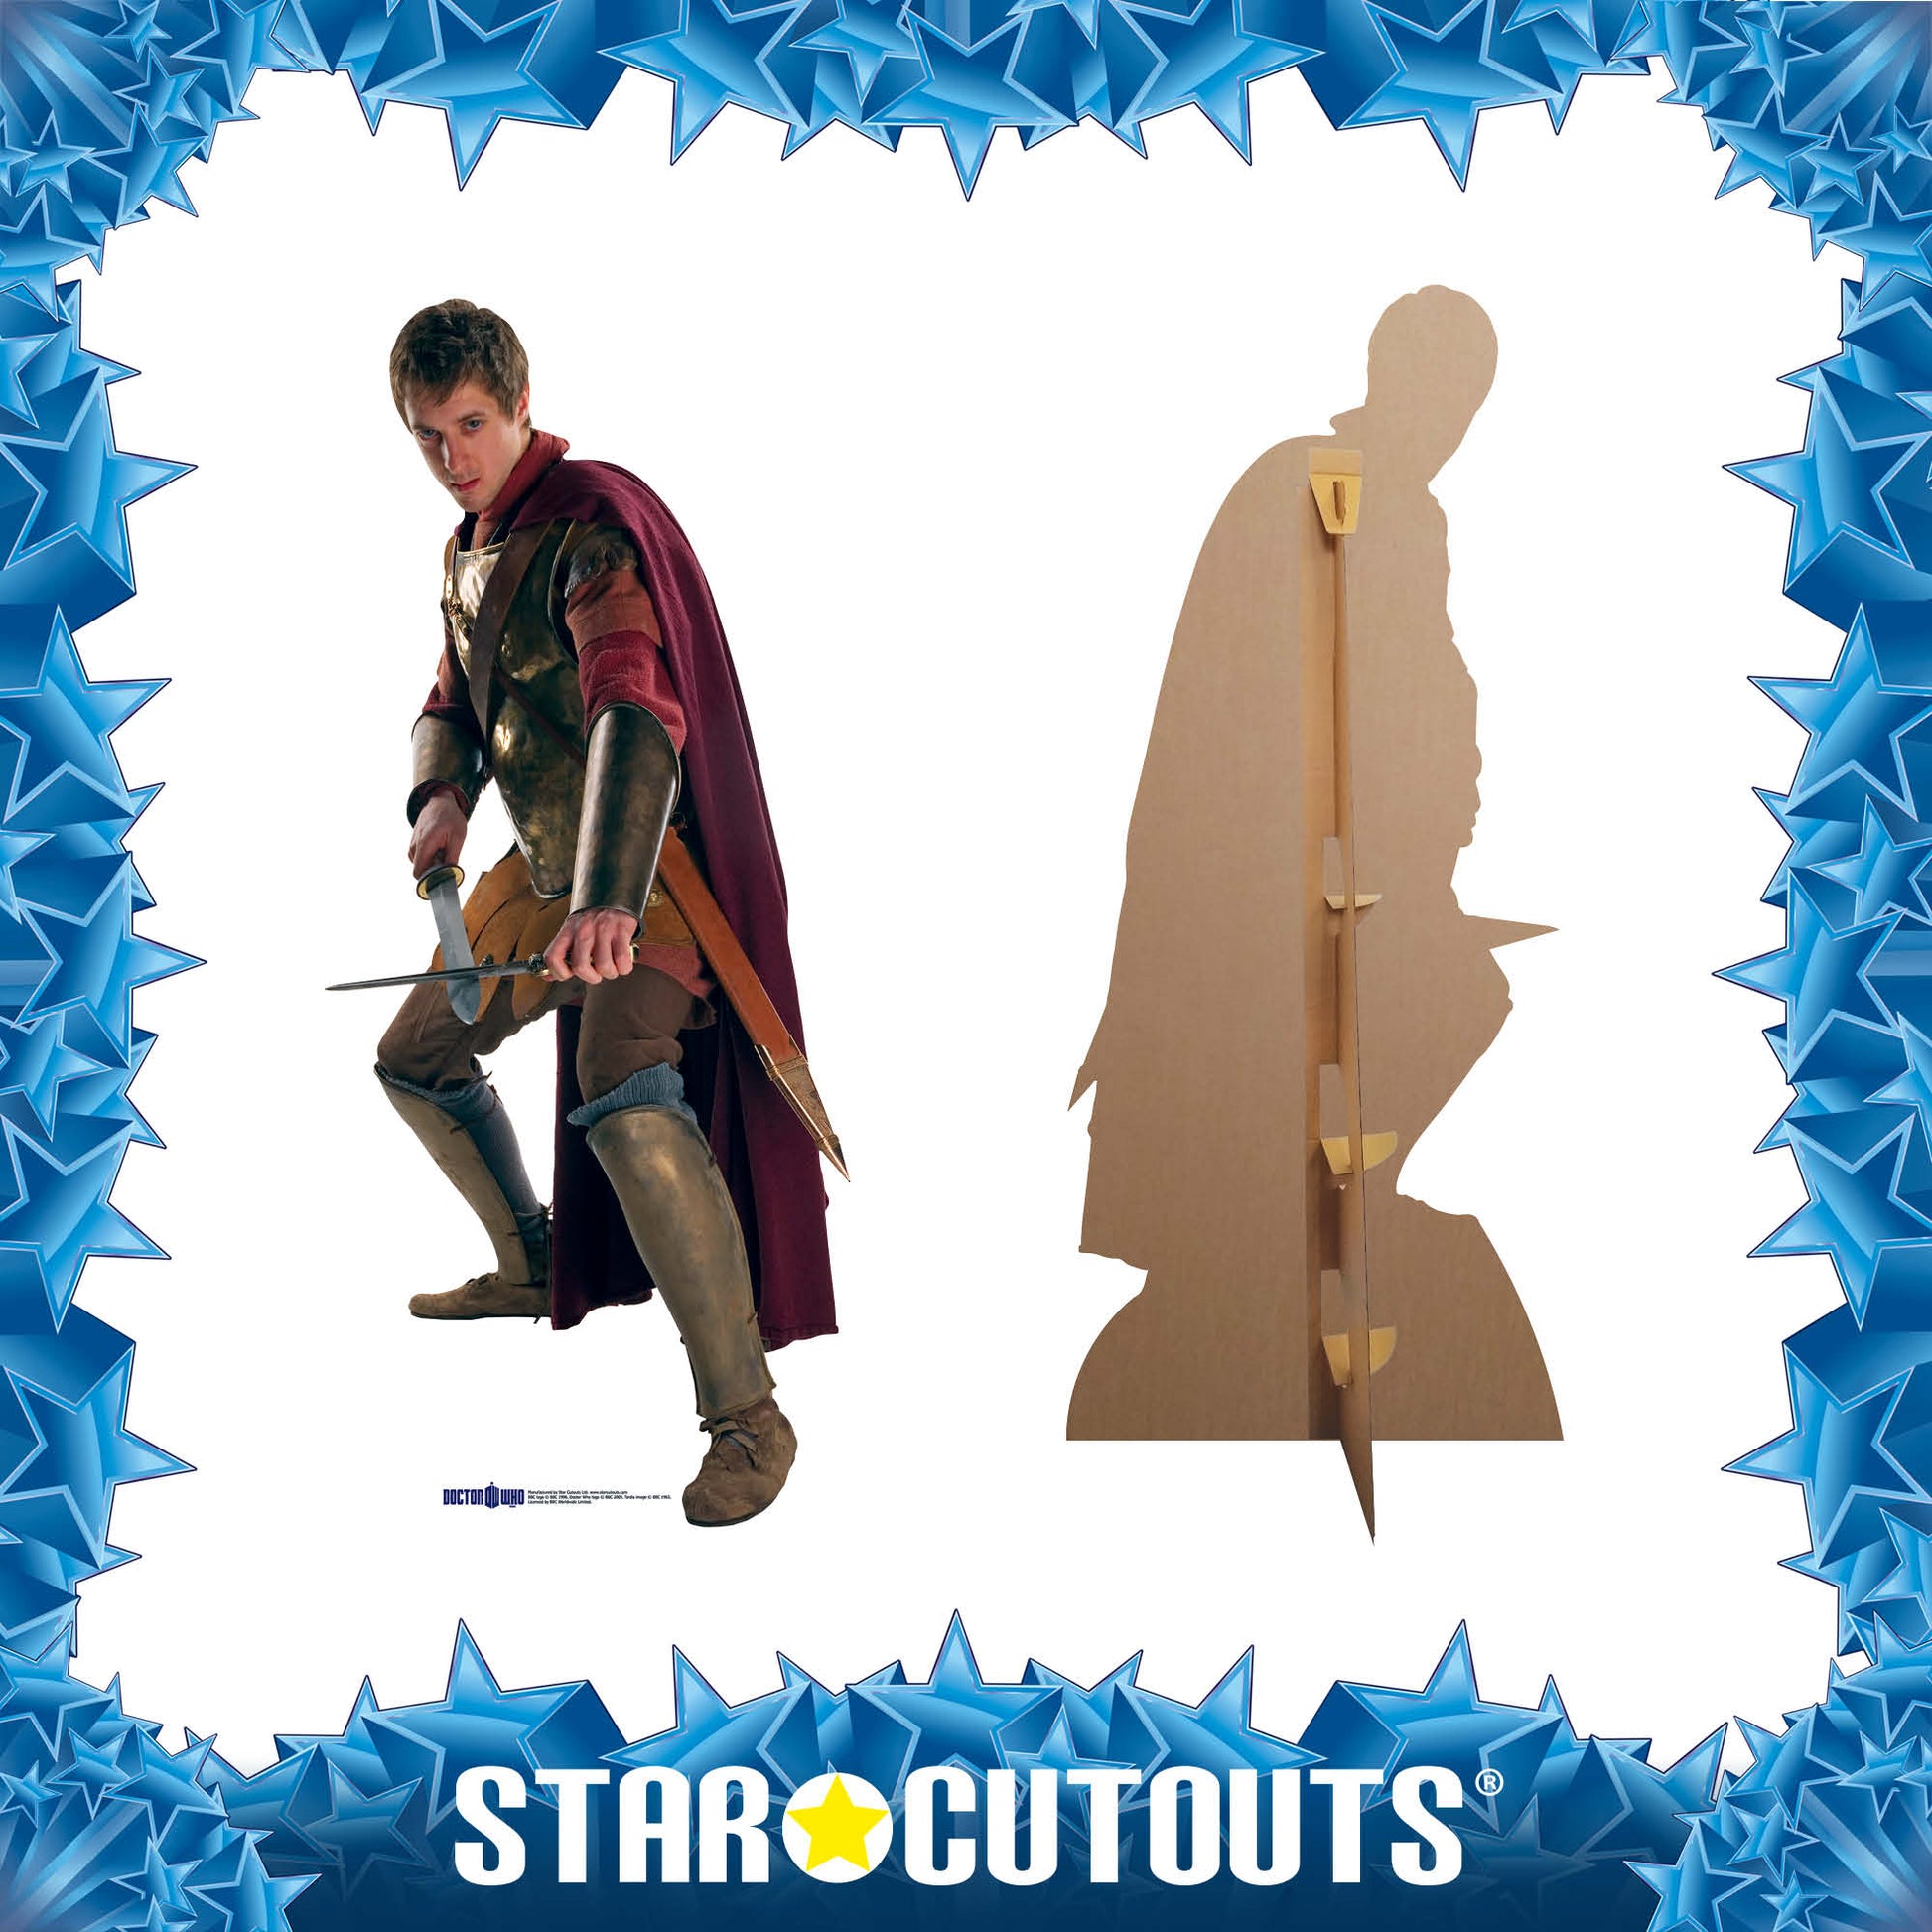 Rory - Roman Auton Cardboard Cut Out Height 176cm - Star Cutouts